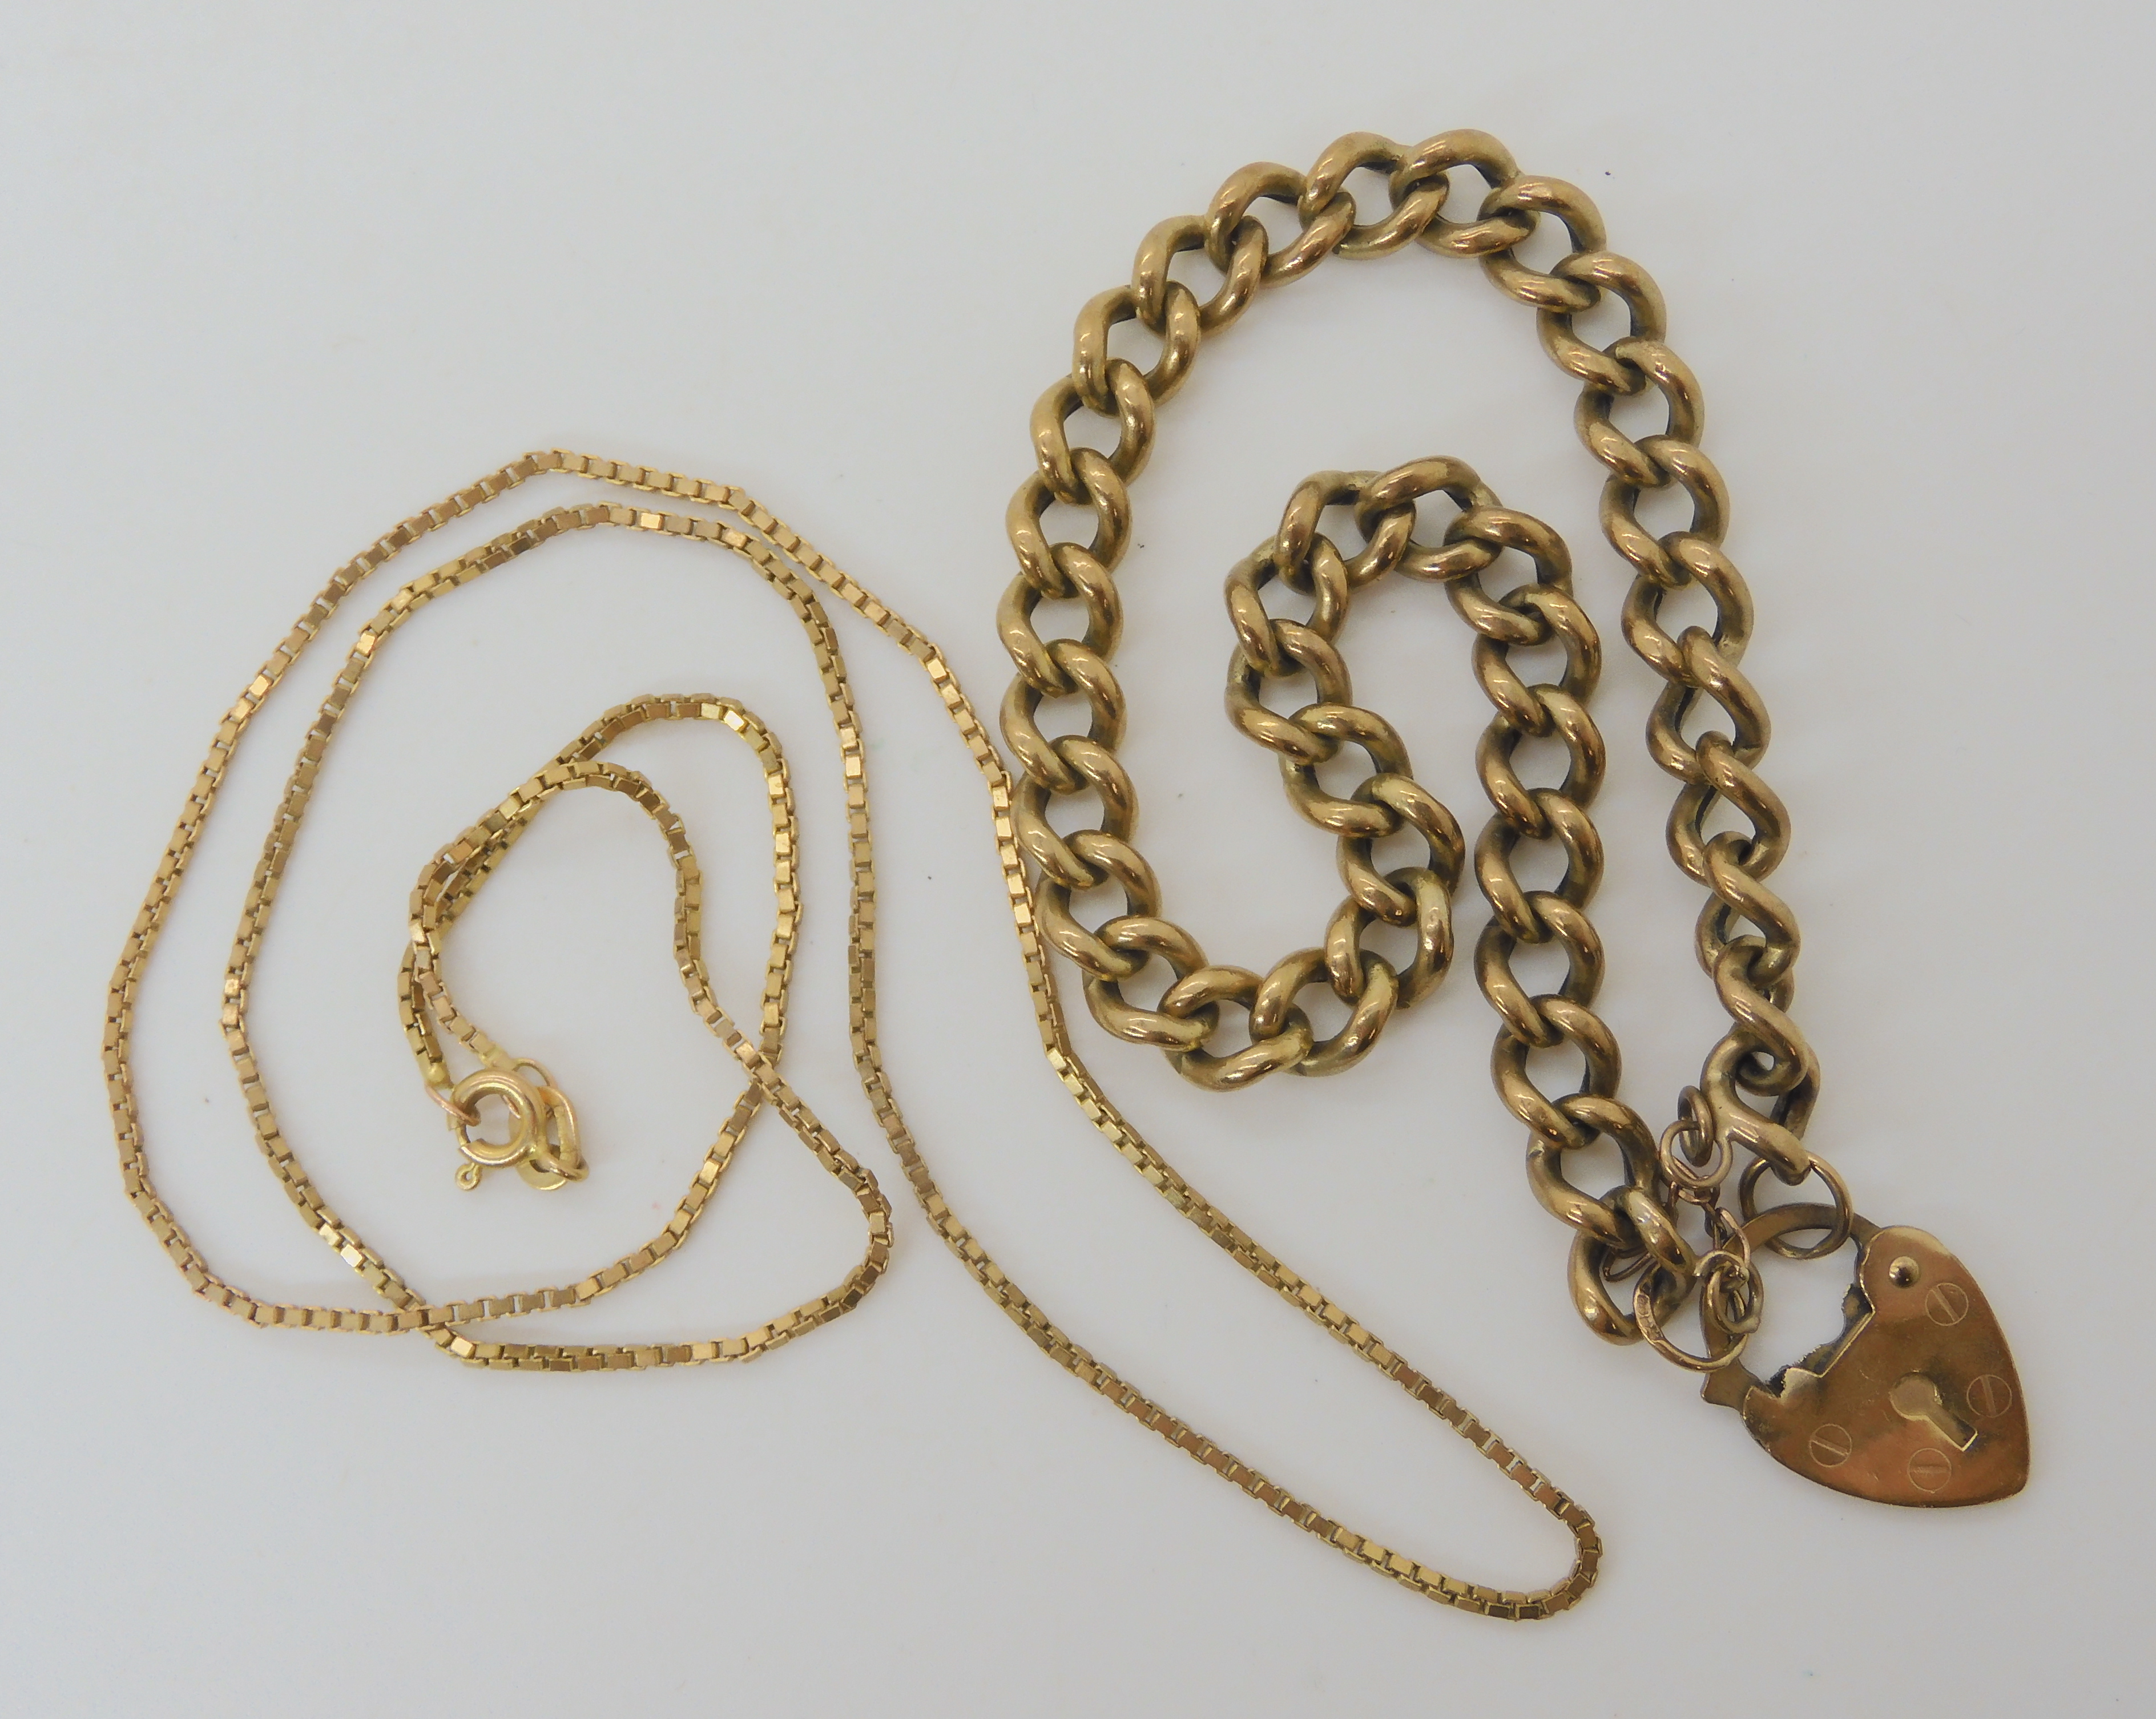 A 9ct gold curb chain bracelet and a 9ct gold box chain length 44cm, weight combined 12.7gms